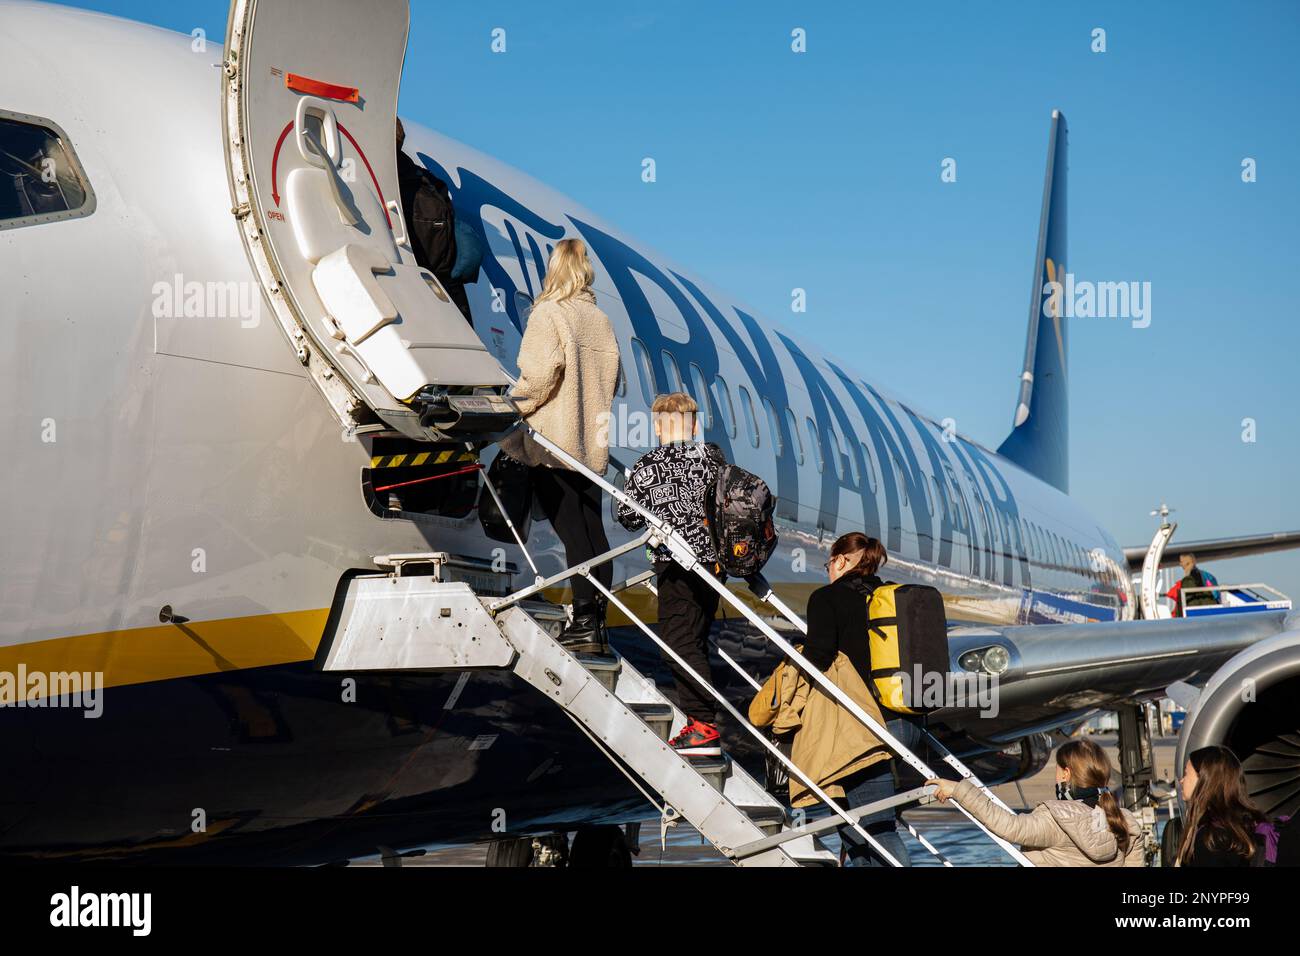 Passengers stepping into Ryanair Boeing 737-800 airplane at London Stansted Airport in Essex, England Stock Photo